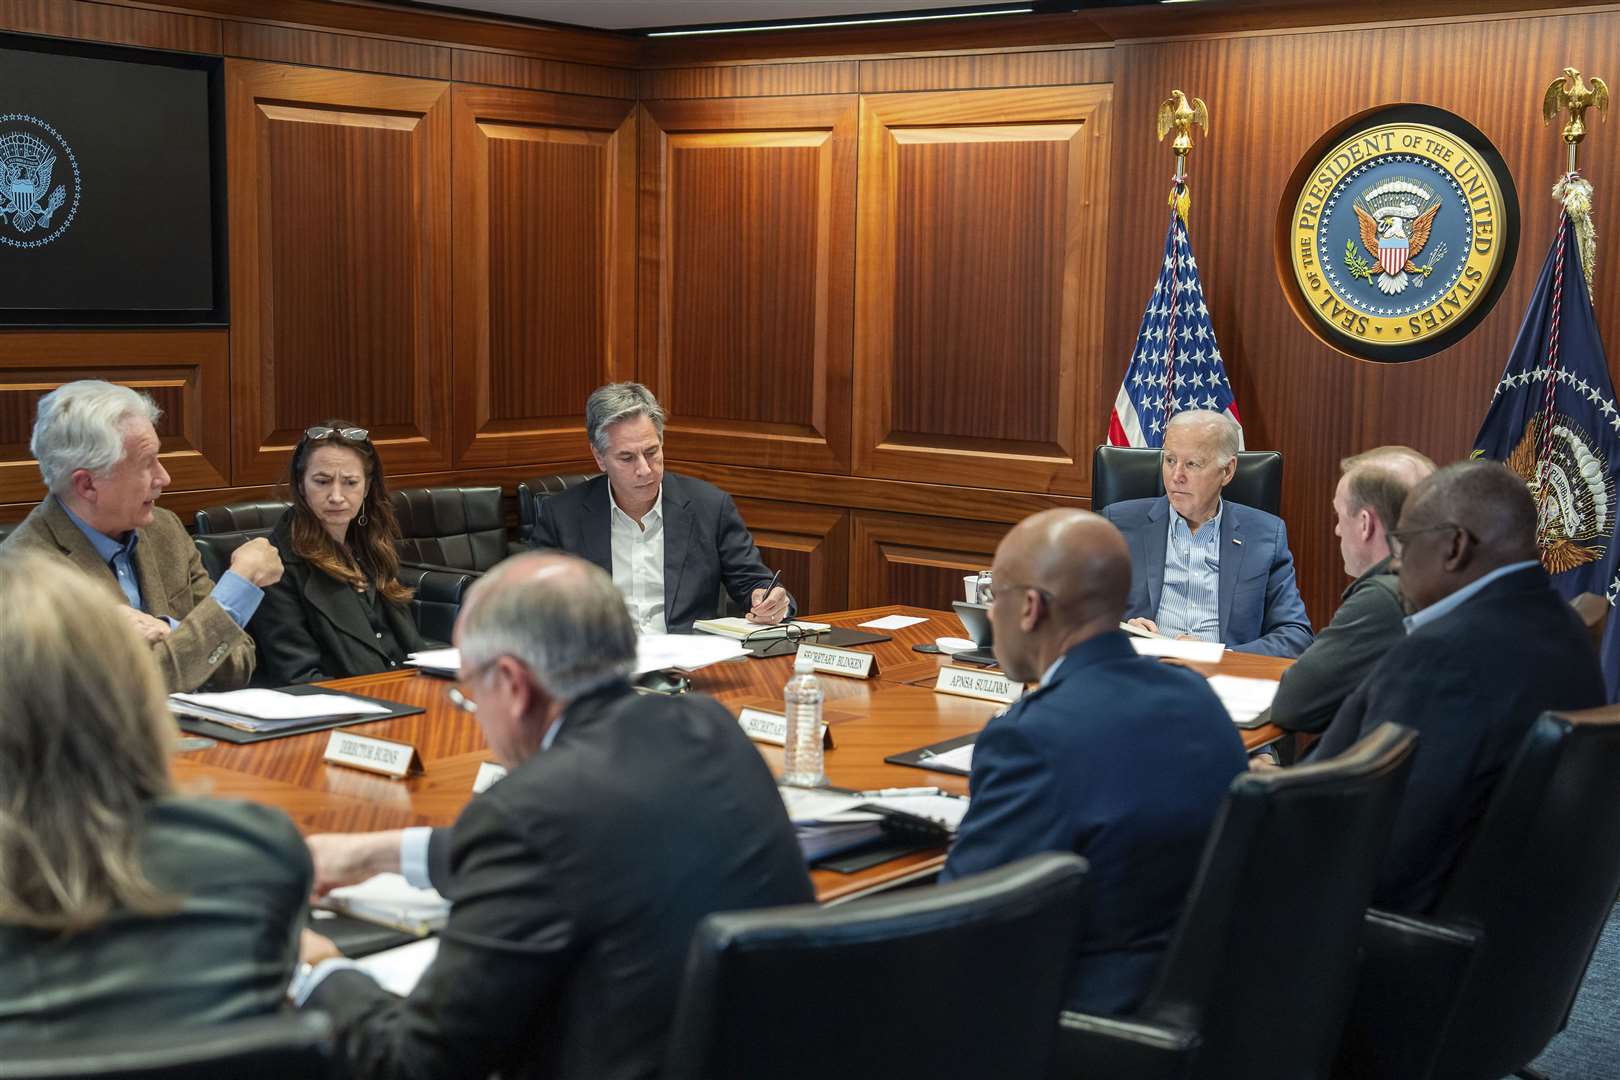 An image provided by the White House shows President Joe Biden, along with members of his national security team, receiving an update on the attacks (Adam Schultz/The White House/AP)